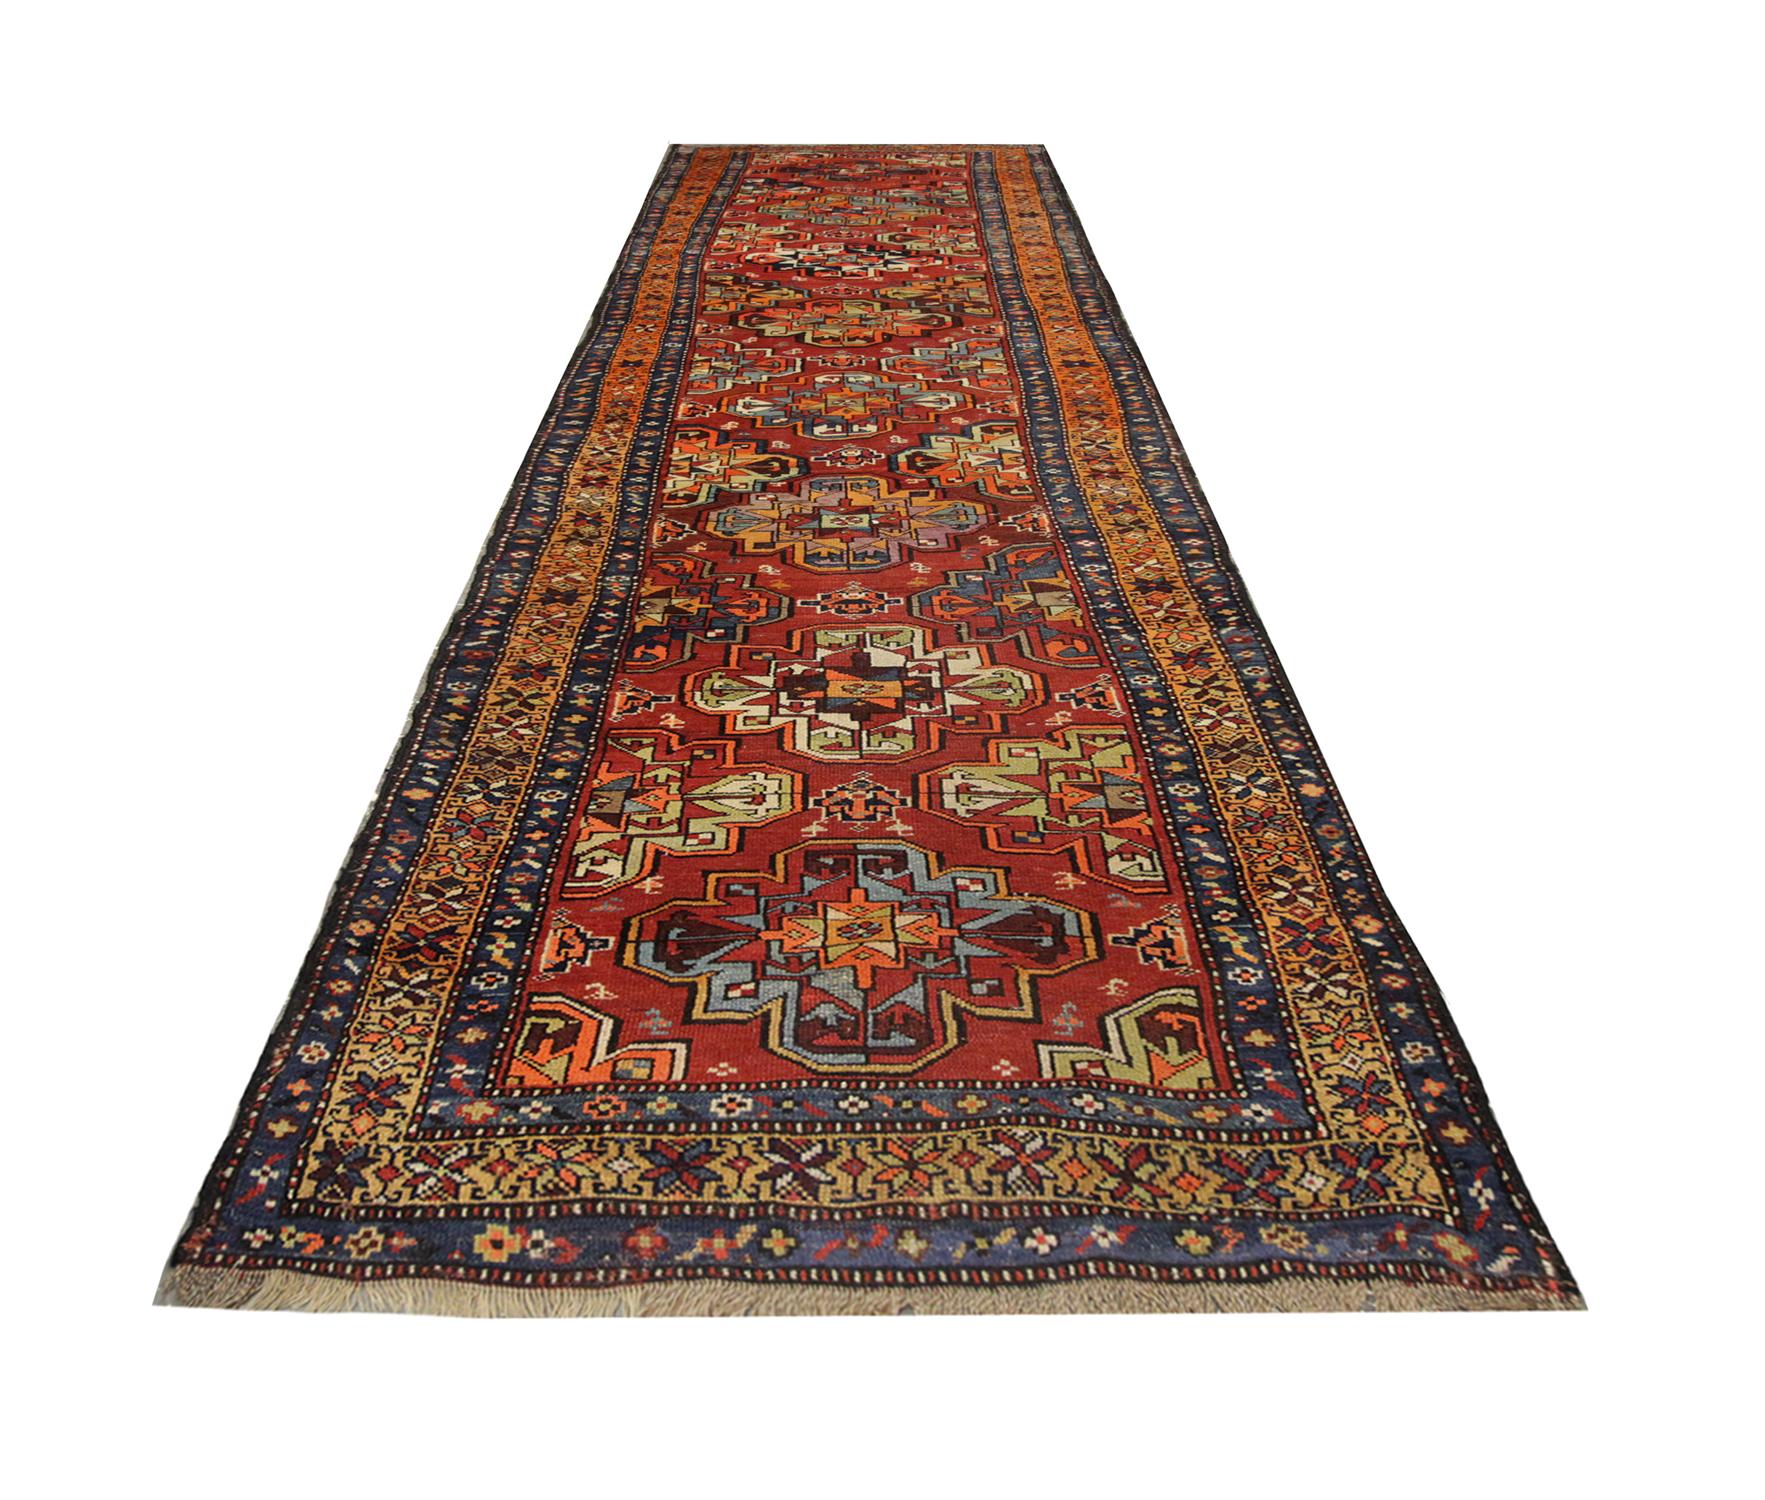 A handmade carpet with a repeat pattern of geometric designs flows through the centre of this Oriental rug, with colors of green blue and brown softly contrasting against the deep orange background, enclosed with a repeat motif border. Rich in